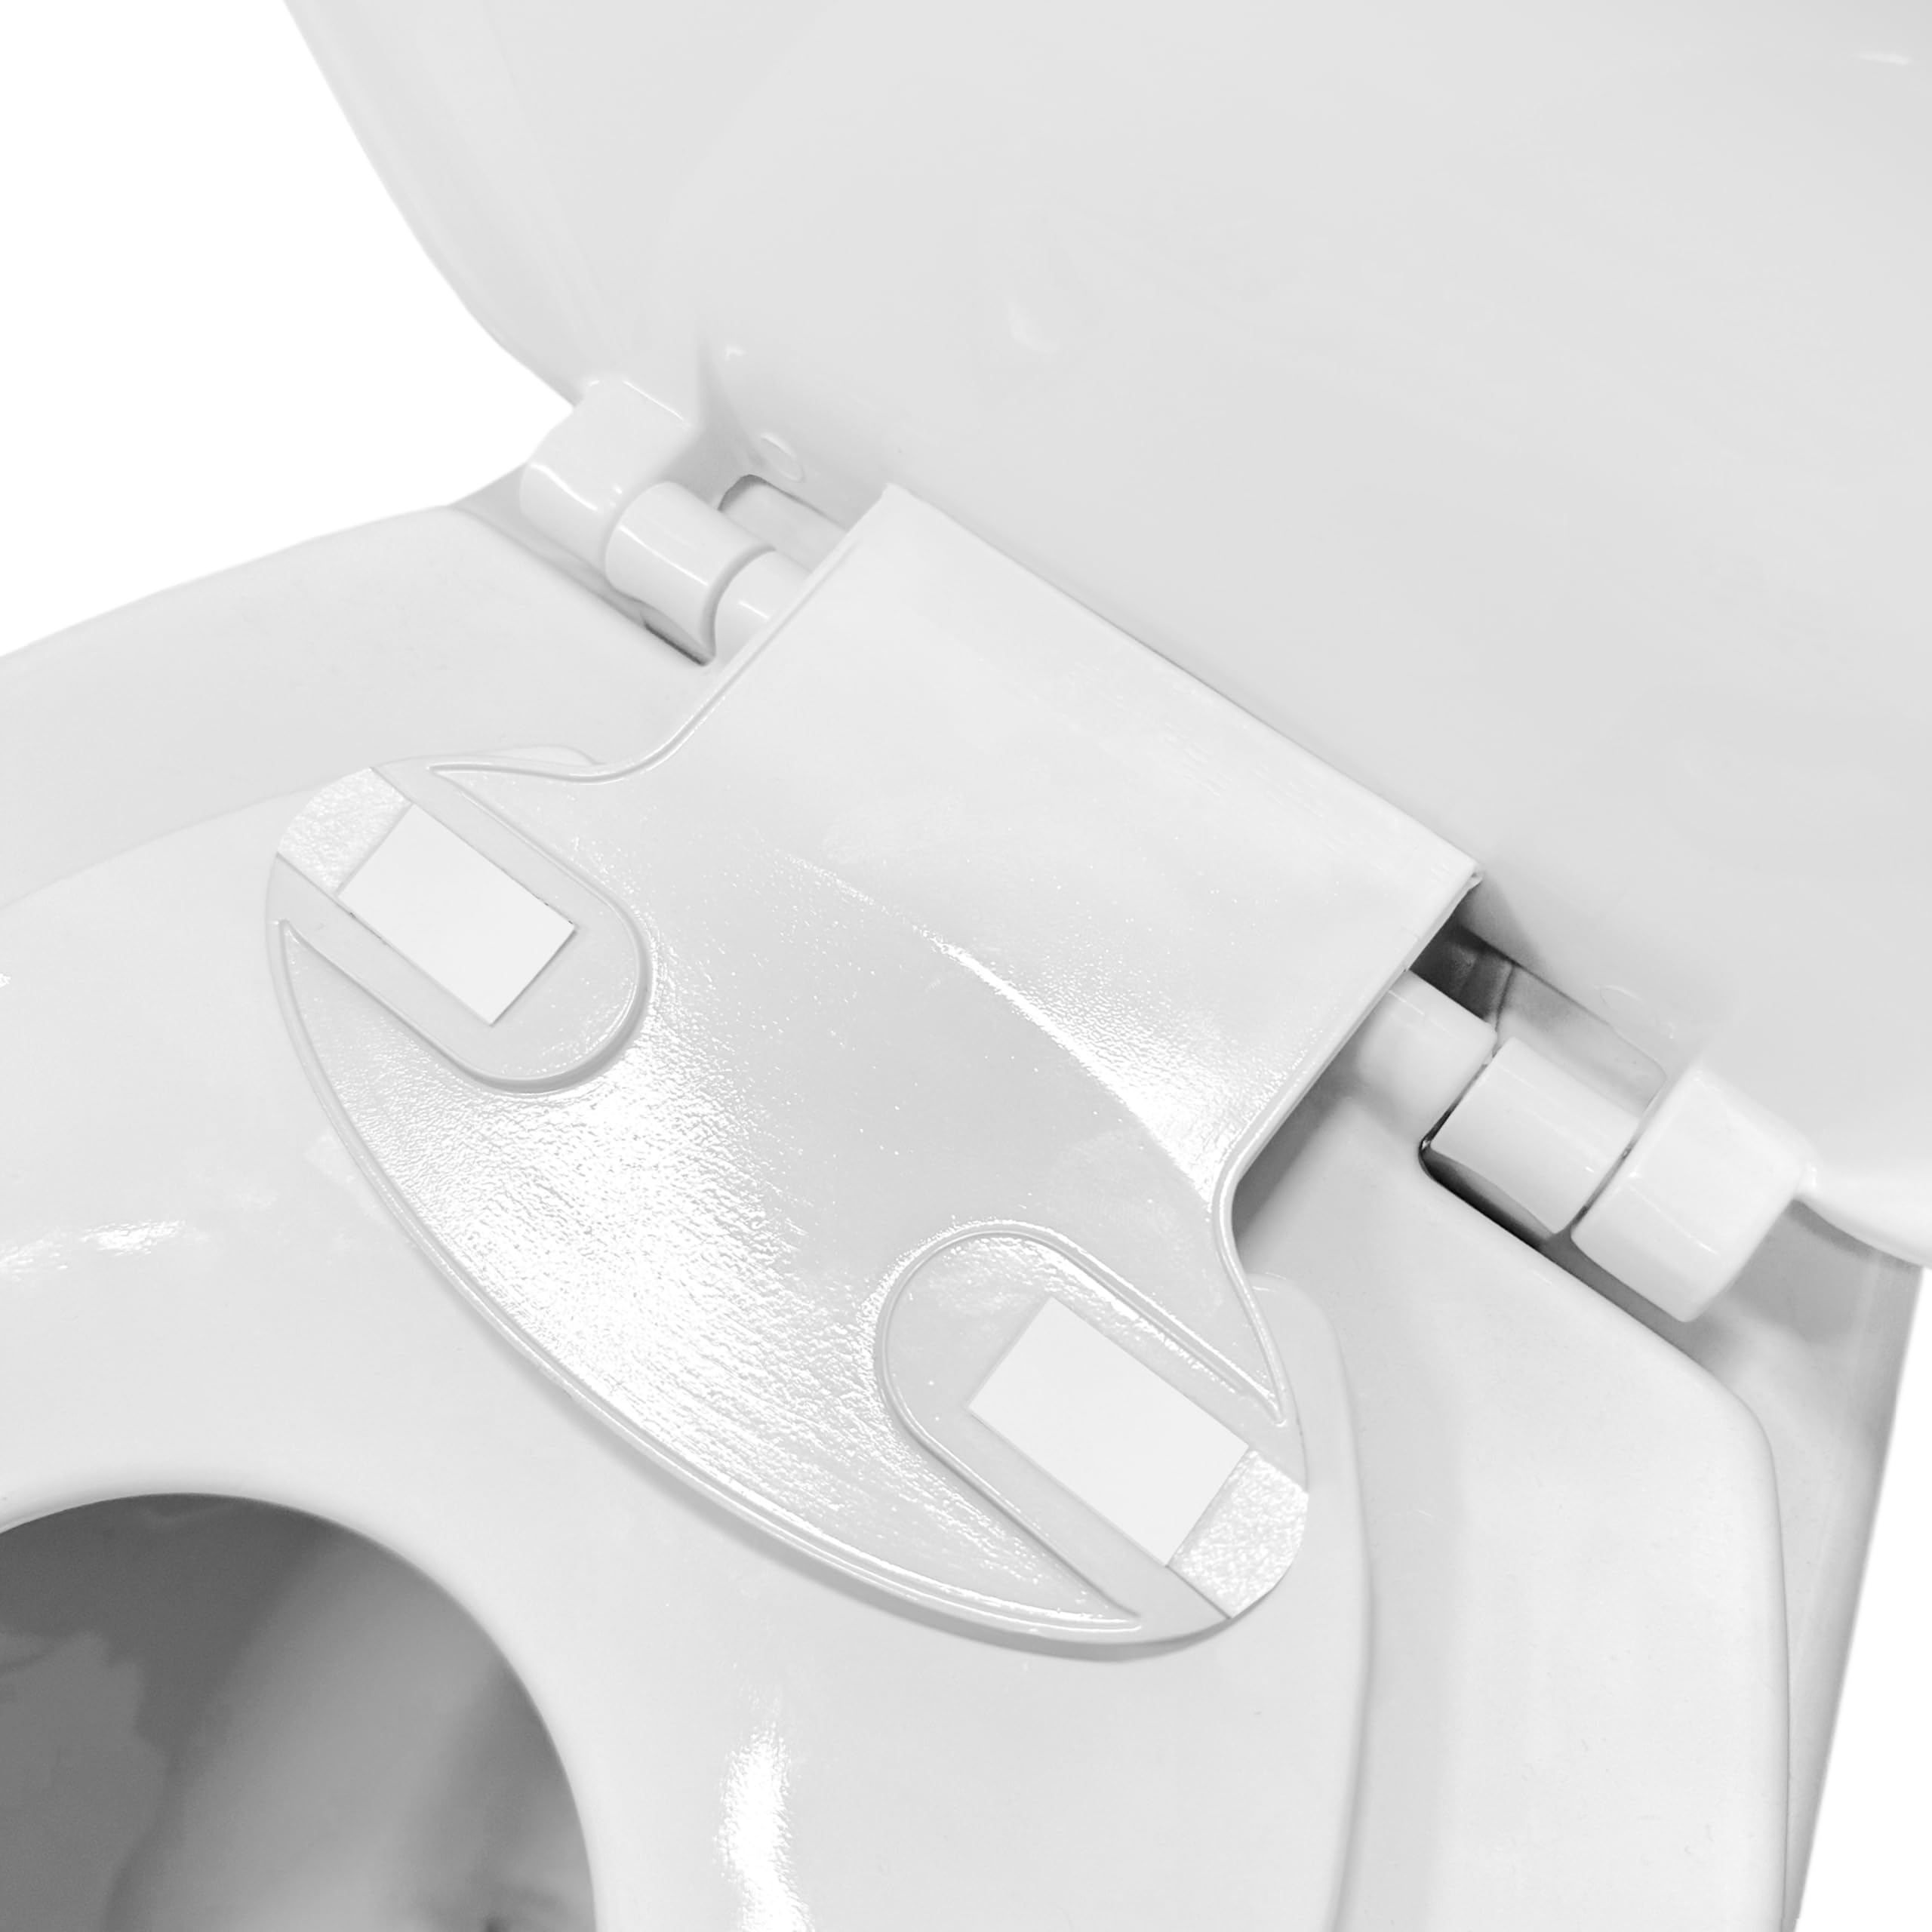 Ingenuity: ity by Ingenuity Flip & Sit Potty Seat (White) – Easy to Set Up & Remove Potty Training Seat That Attaches to Adult Toilet Seat